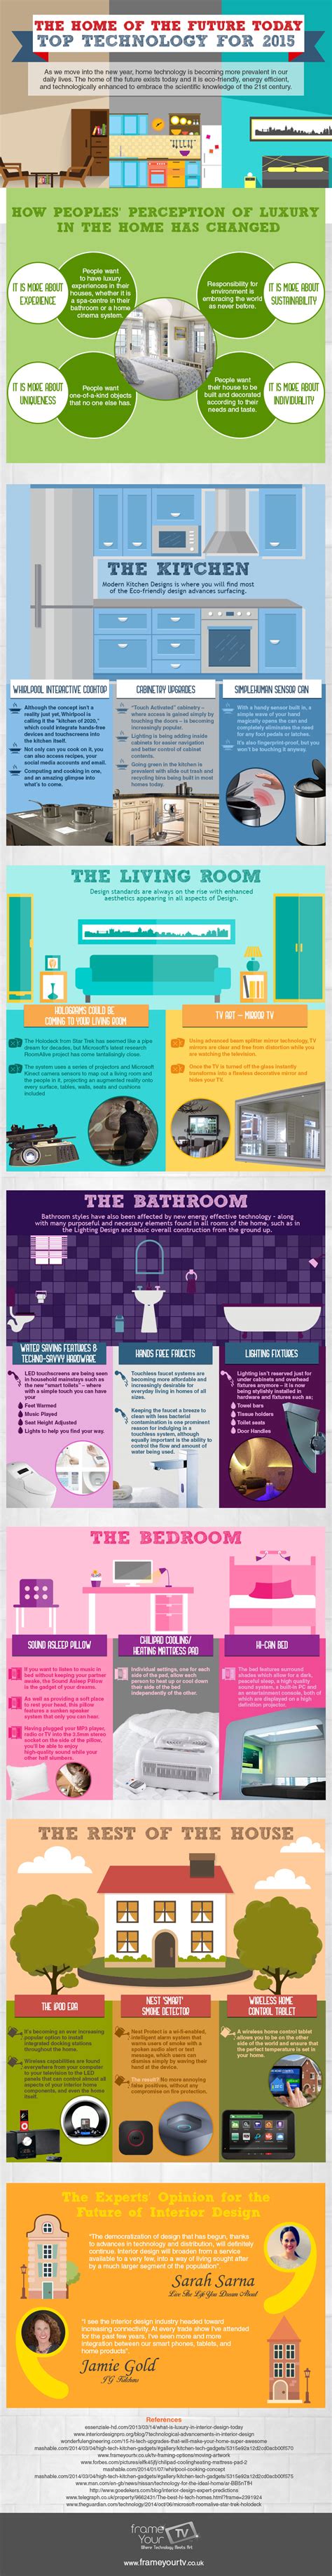 infographic home technology trends of 2015 and beyond